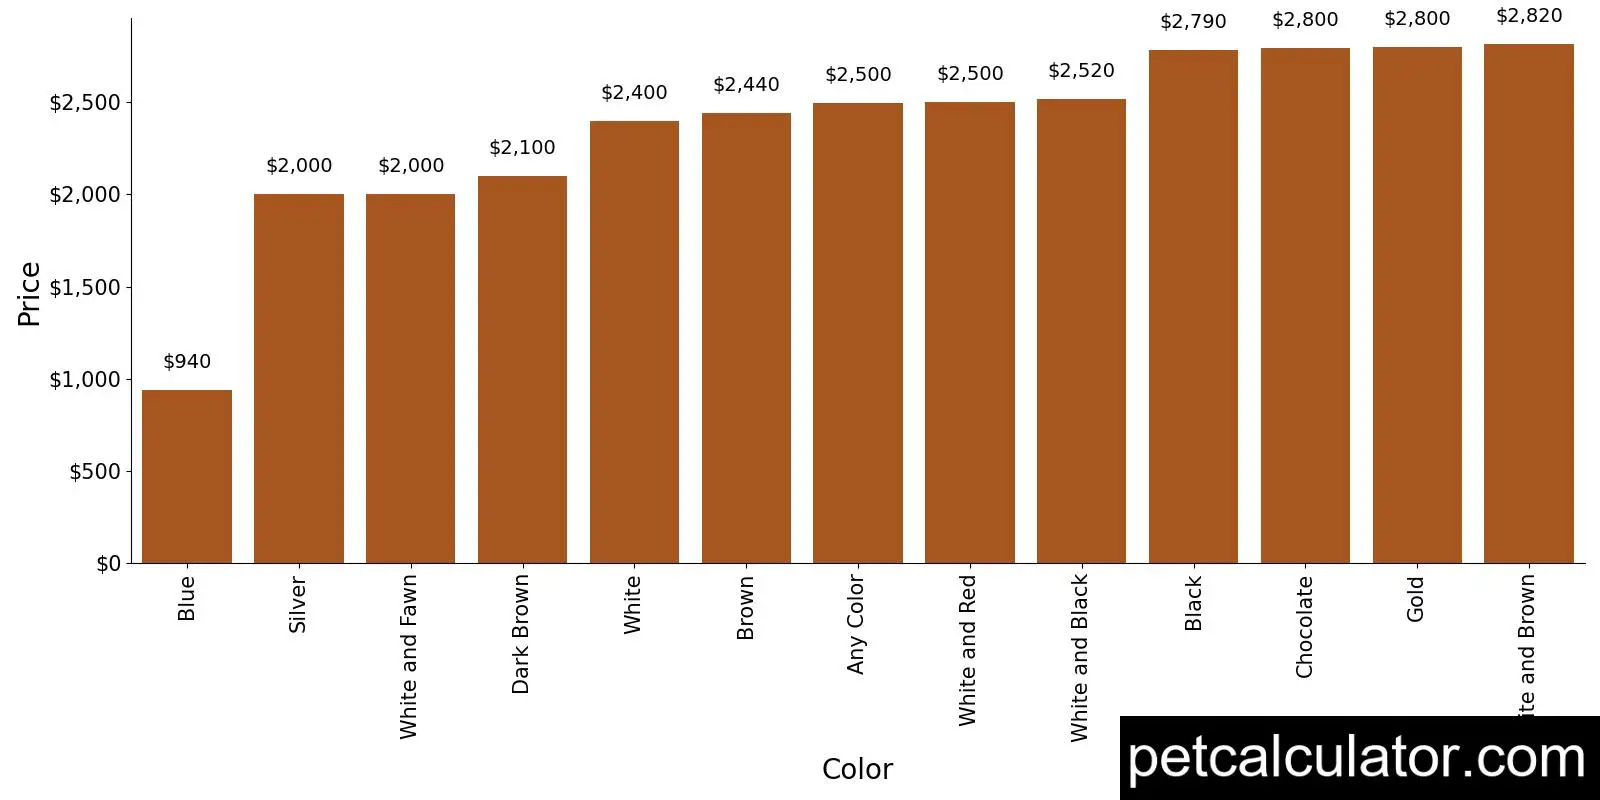 Price of Portuguese Water Dog by Color 